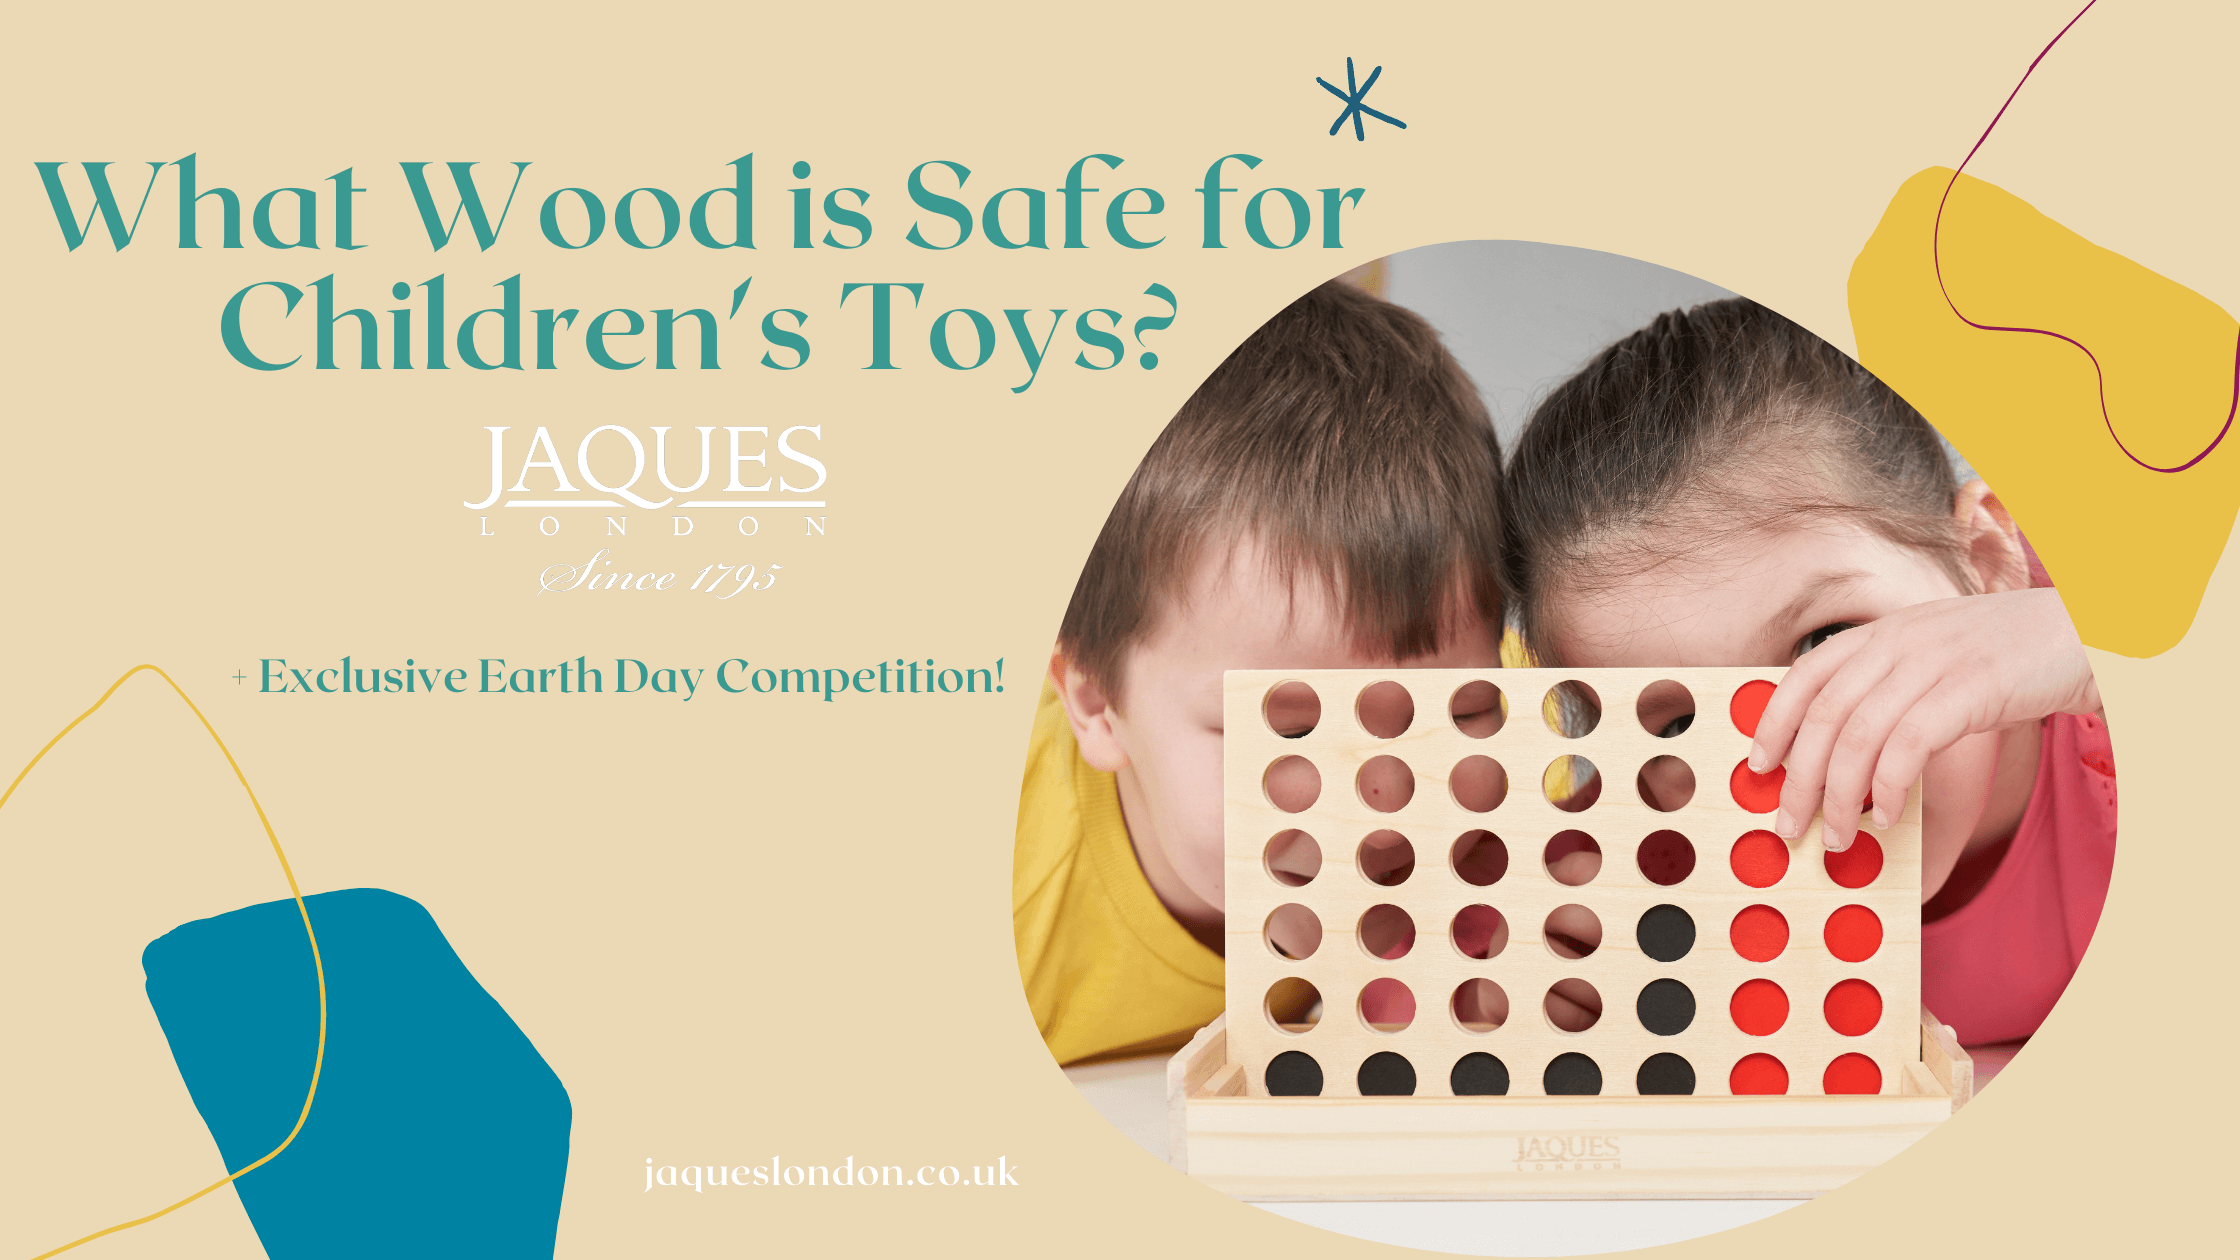 What Wood is Safe for Children's Toys?